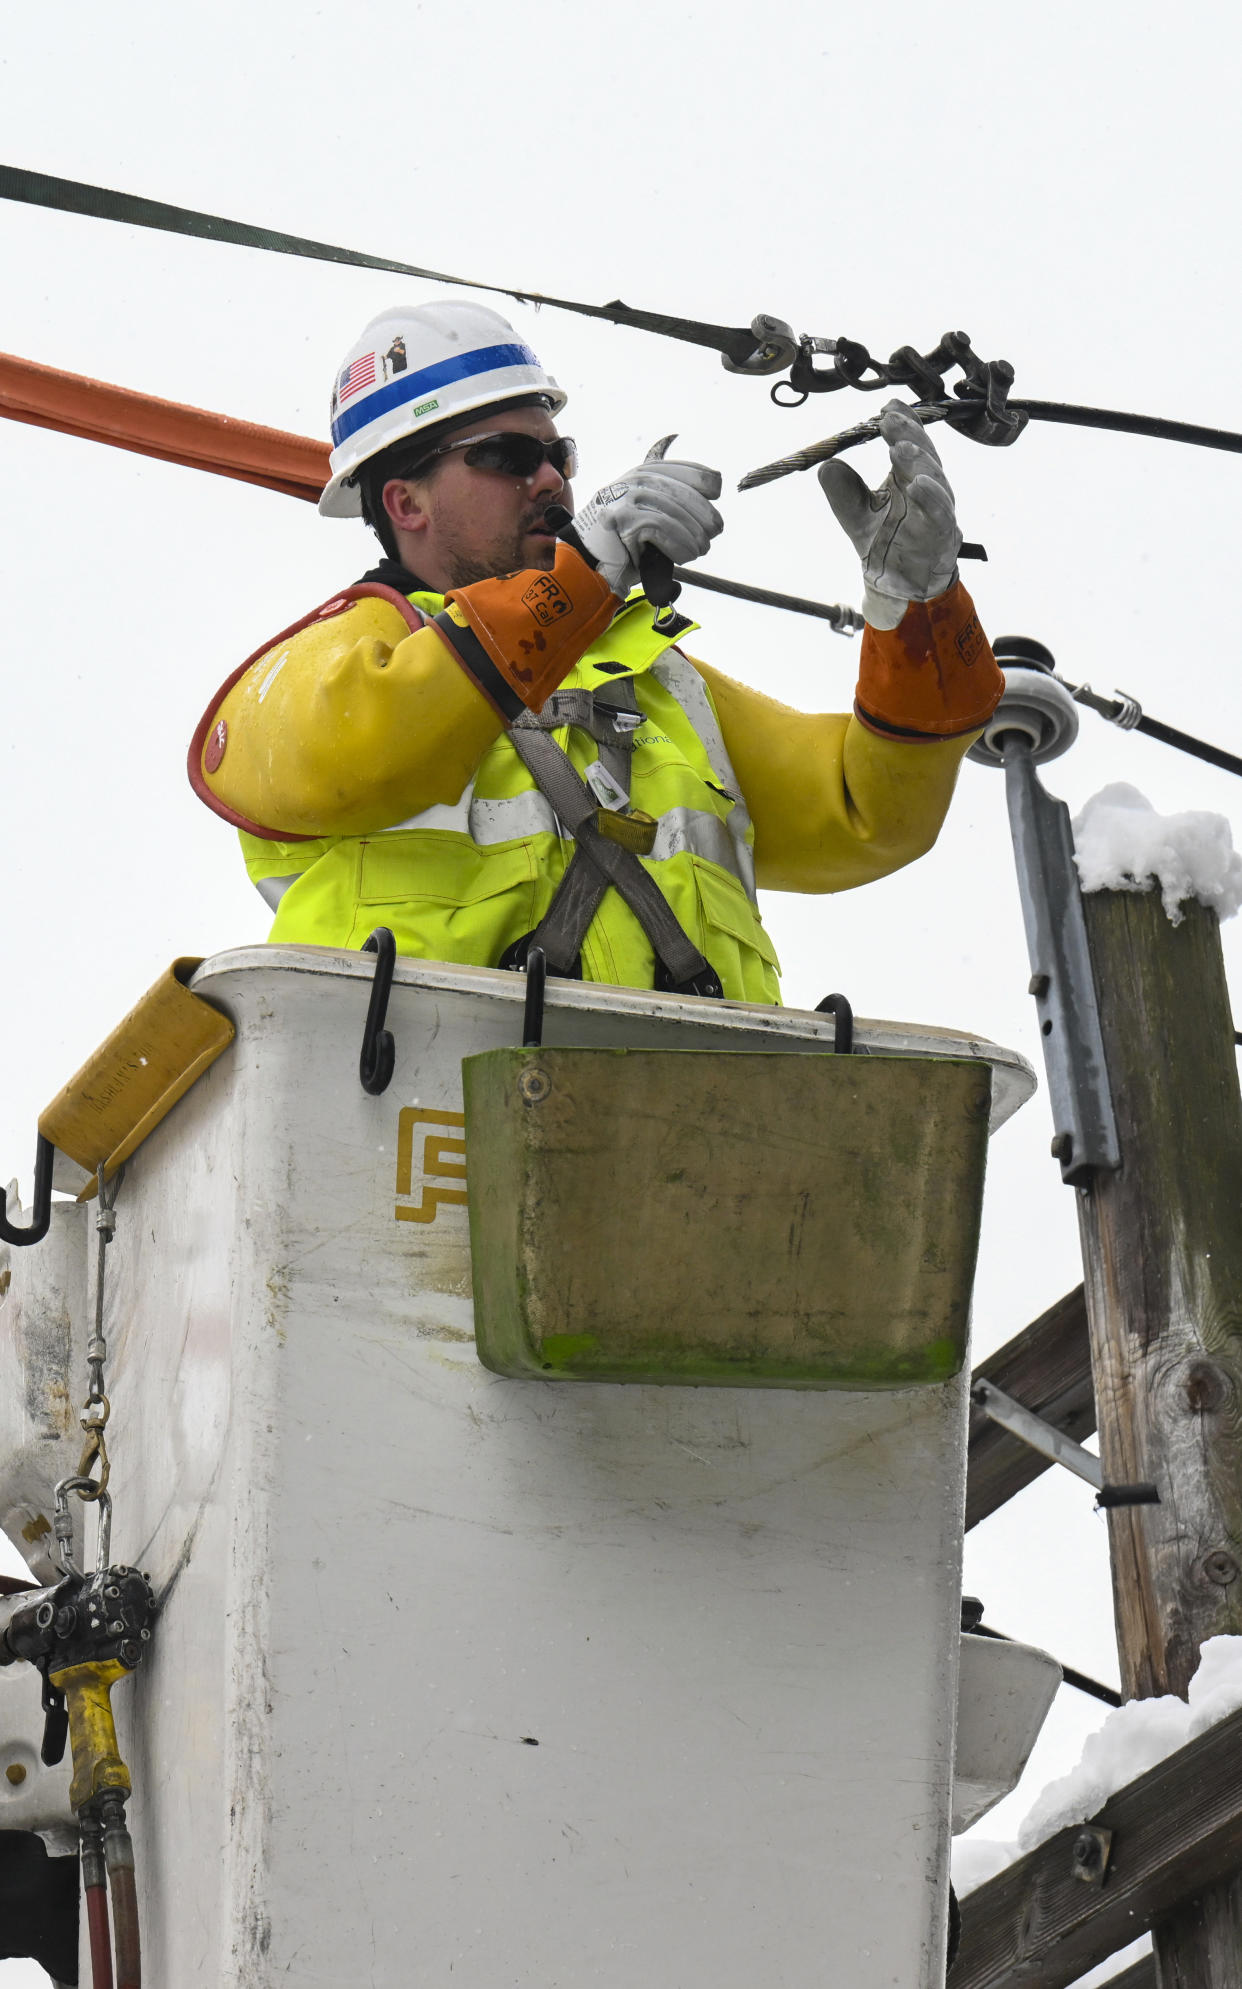 National Grid lineman, Jim Sheeran repairs a primary power line during a winter snow storm Tuesday, March 14, 2023, in Ballston Lake, N.Y. (AP Photo/Hans Pennink)